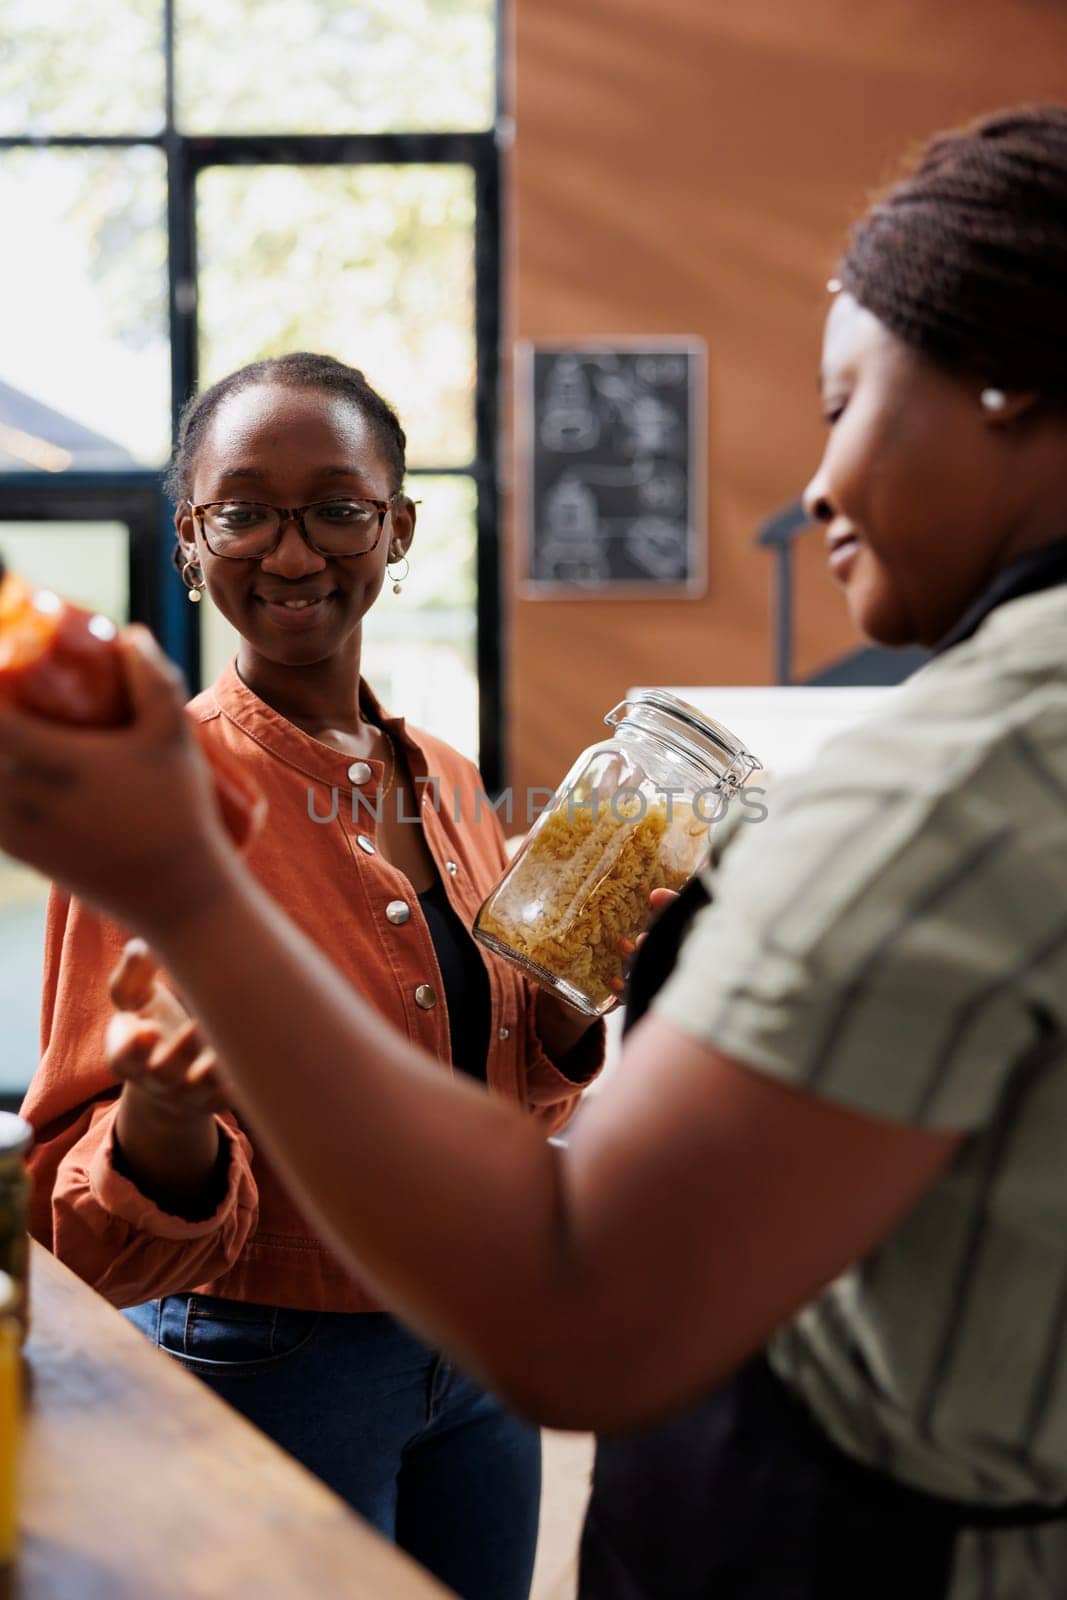 African American women hold organic products at bio supermarket, promoting sustainable, locally grown food. Female customer and vendor talking about health benefits of freshly made pasta and sauce.